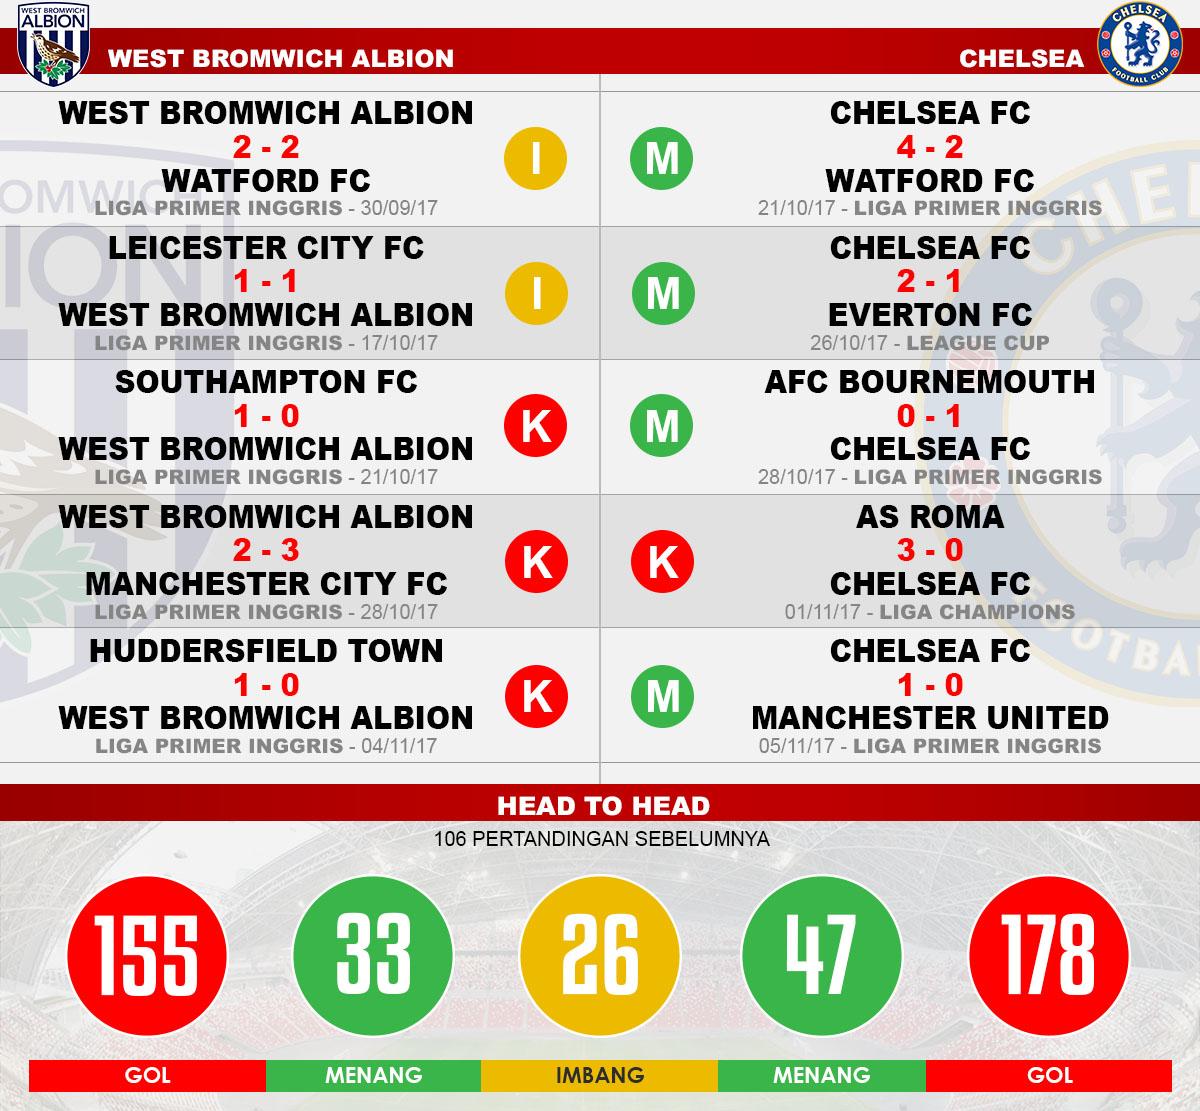 Head to head West Bromwich Albion vs Chelsea Copyright: Indosport.com